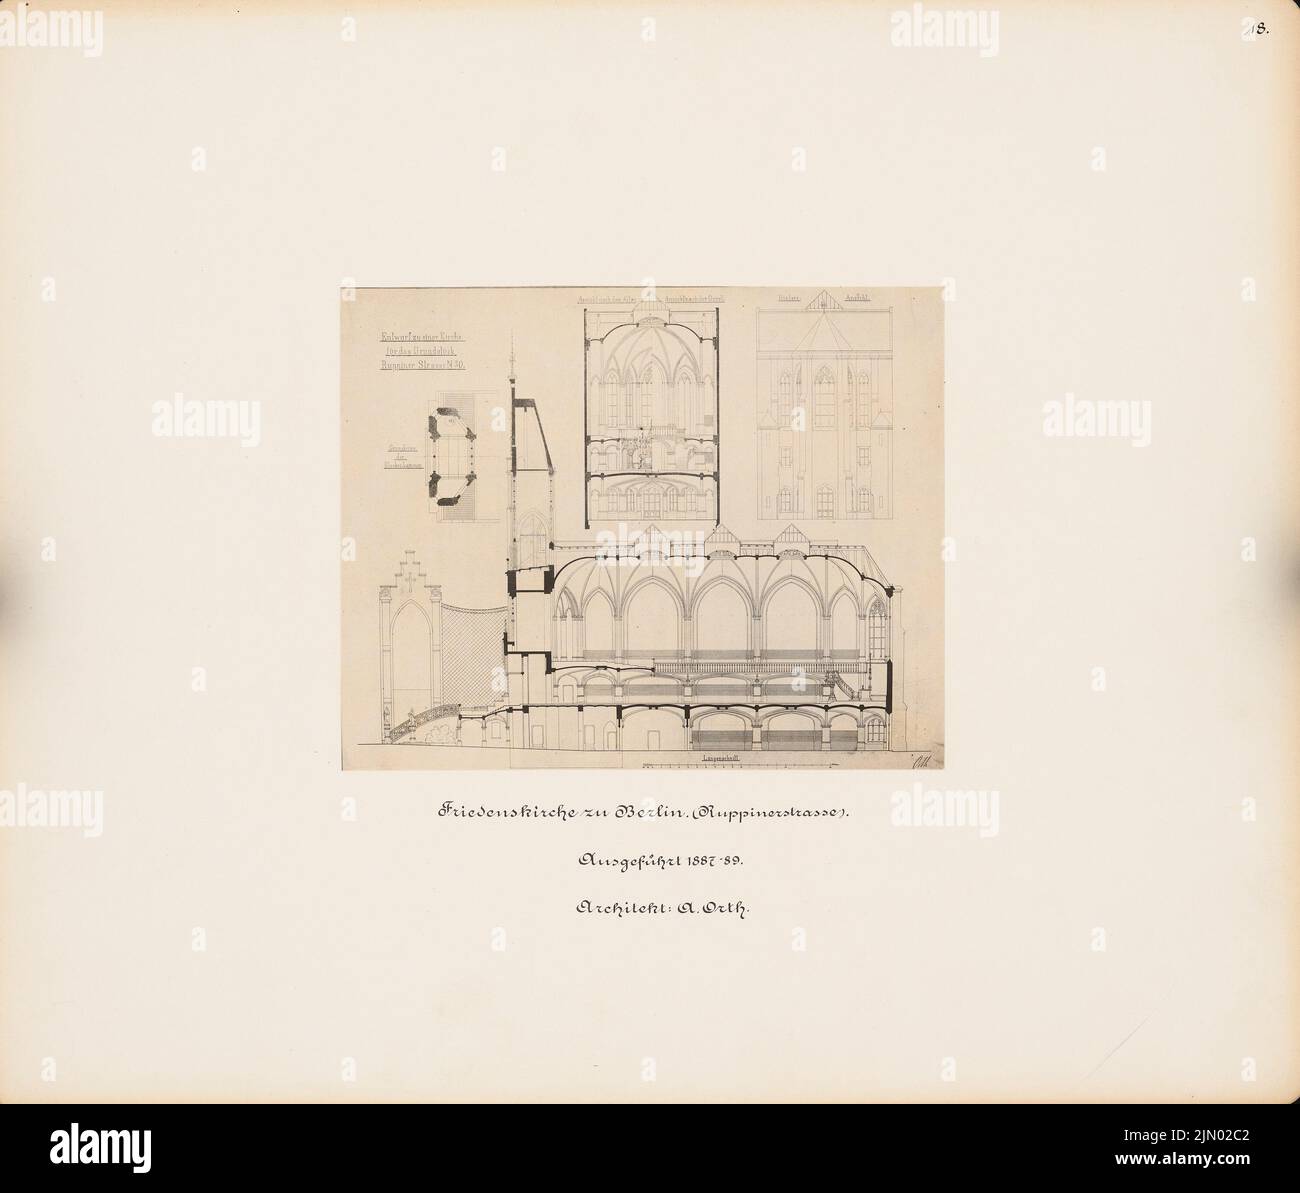 Orth August (1828-1901), Friedenskirche, Berlin (1887-1889): cross-section, longitudinal section, view, floor plan of the bell chamber. Photo on cardboard, 33.5 x 39.4 cm (including scan edges) Orth August  (1828-1901): Friedenskirche, Berlin Stock Photo